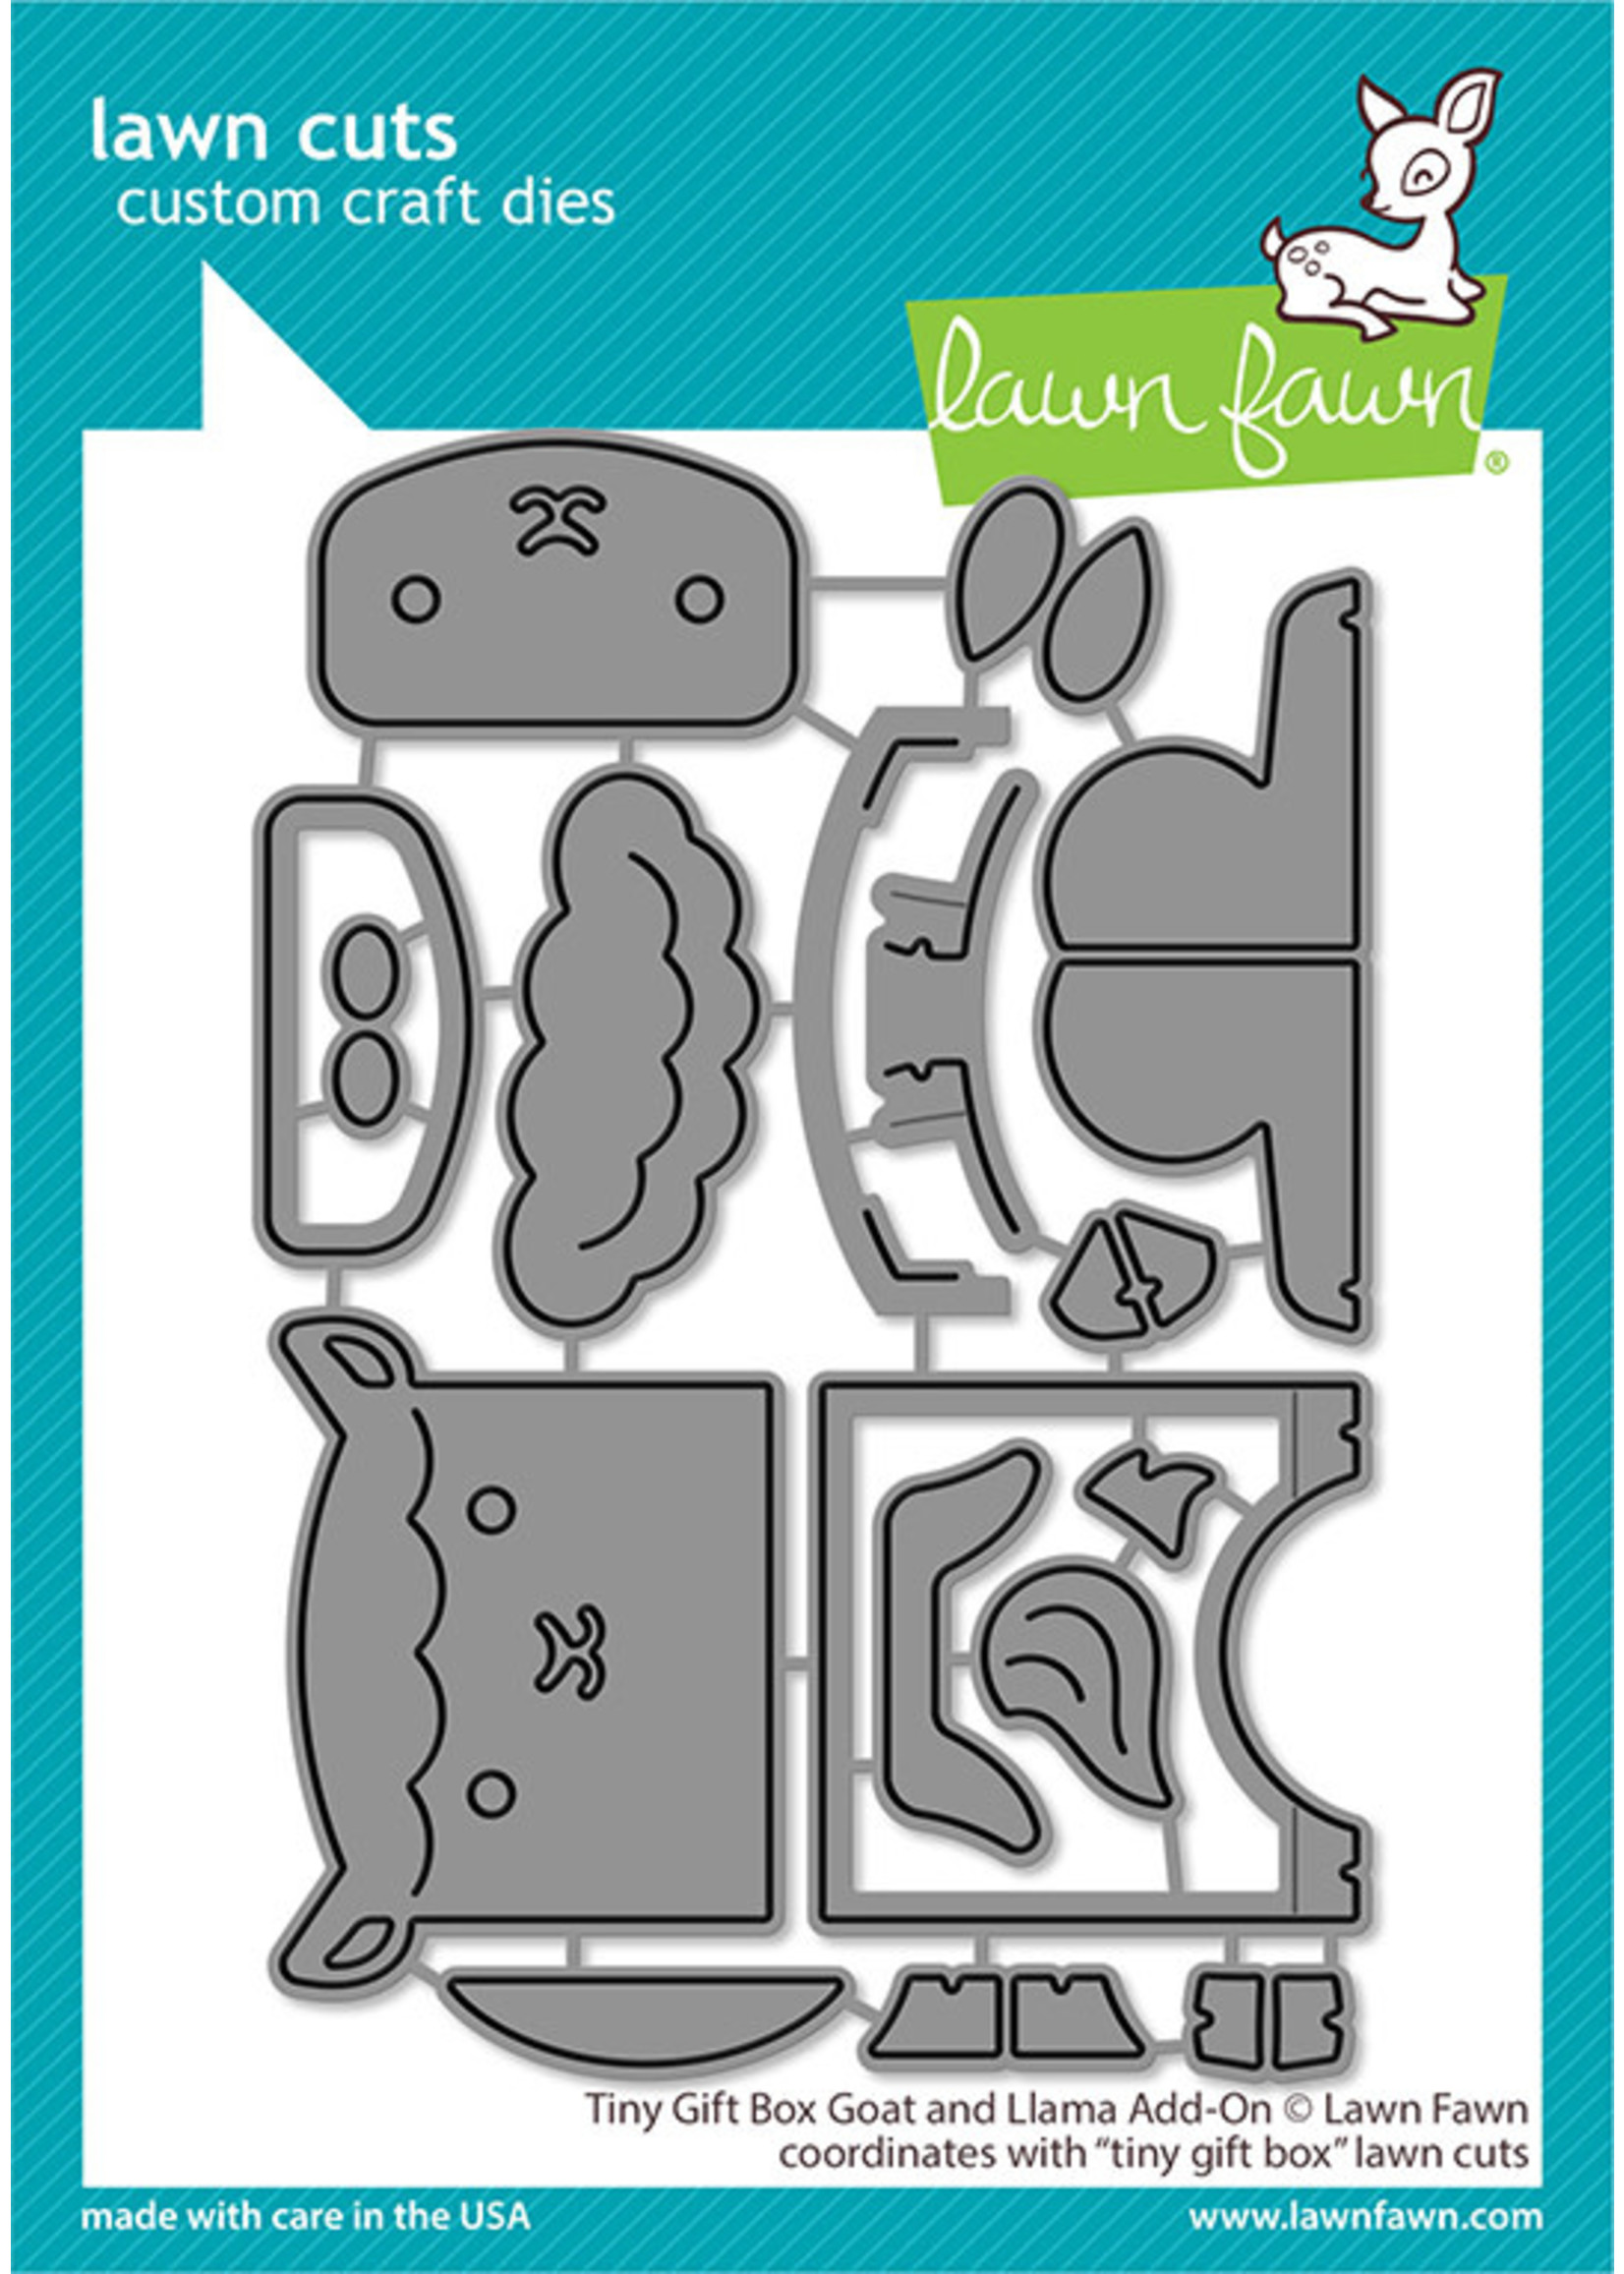 Lawn Fawn tiny gift box goat and llama add-on die